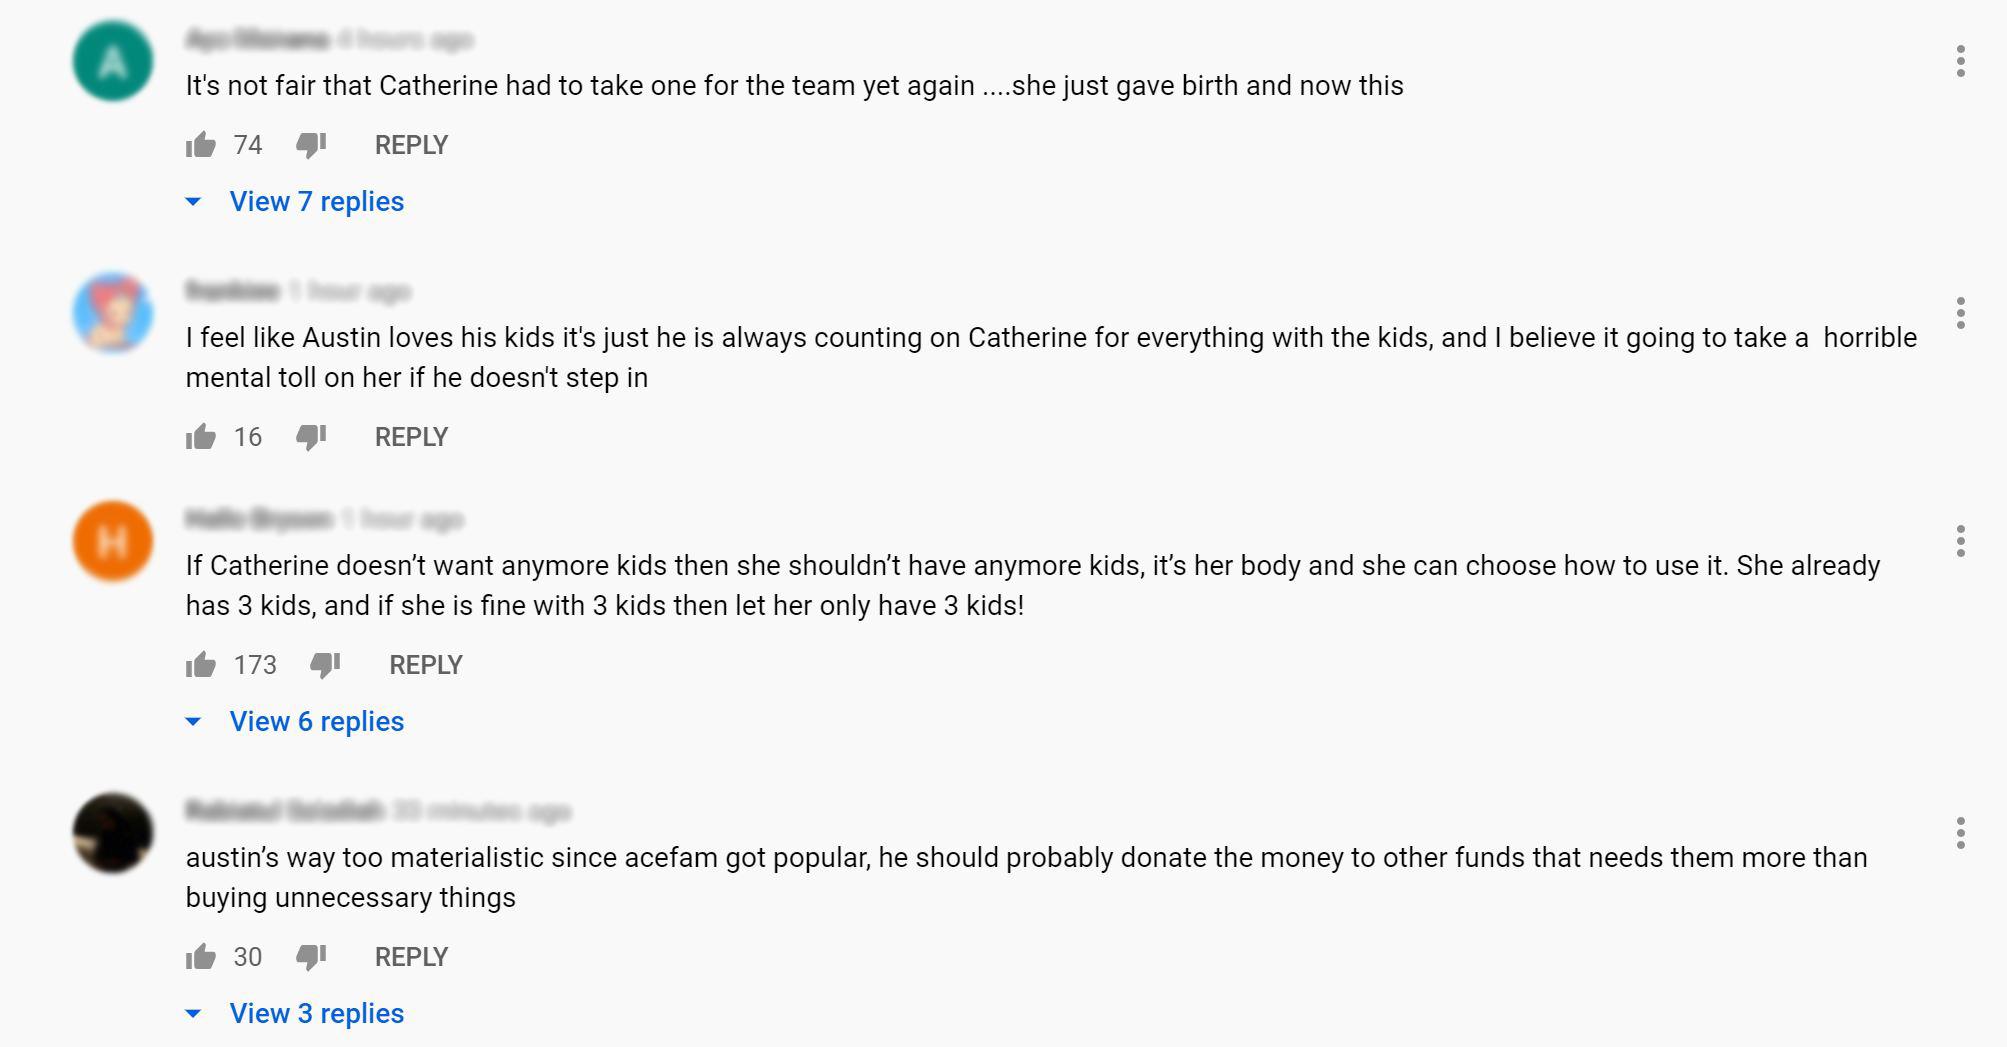 YouTube viewers comment on the ACE Family's latest decision.